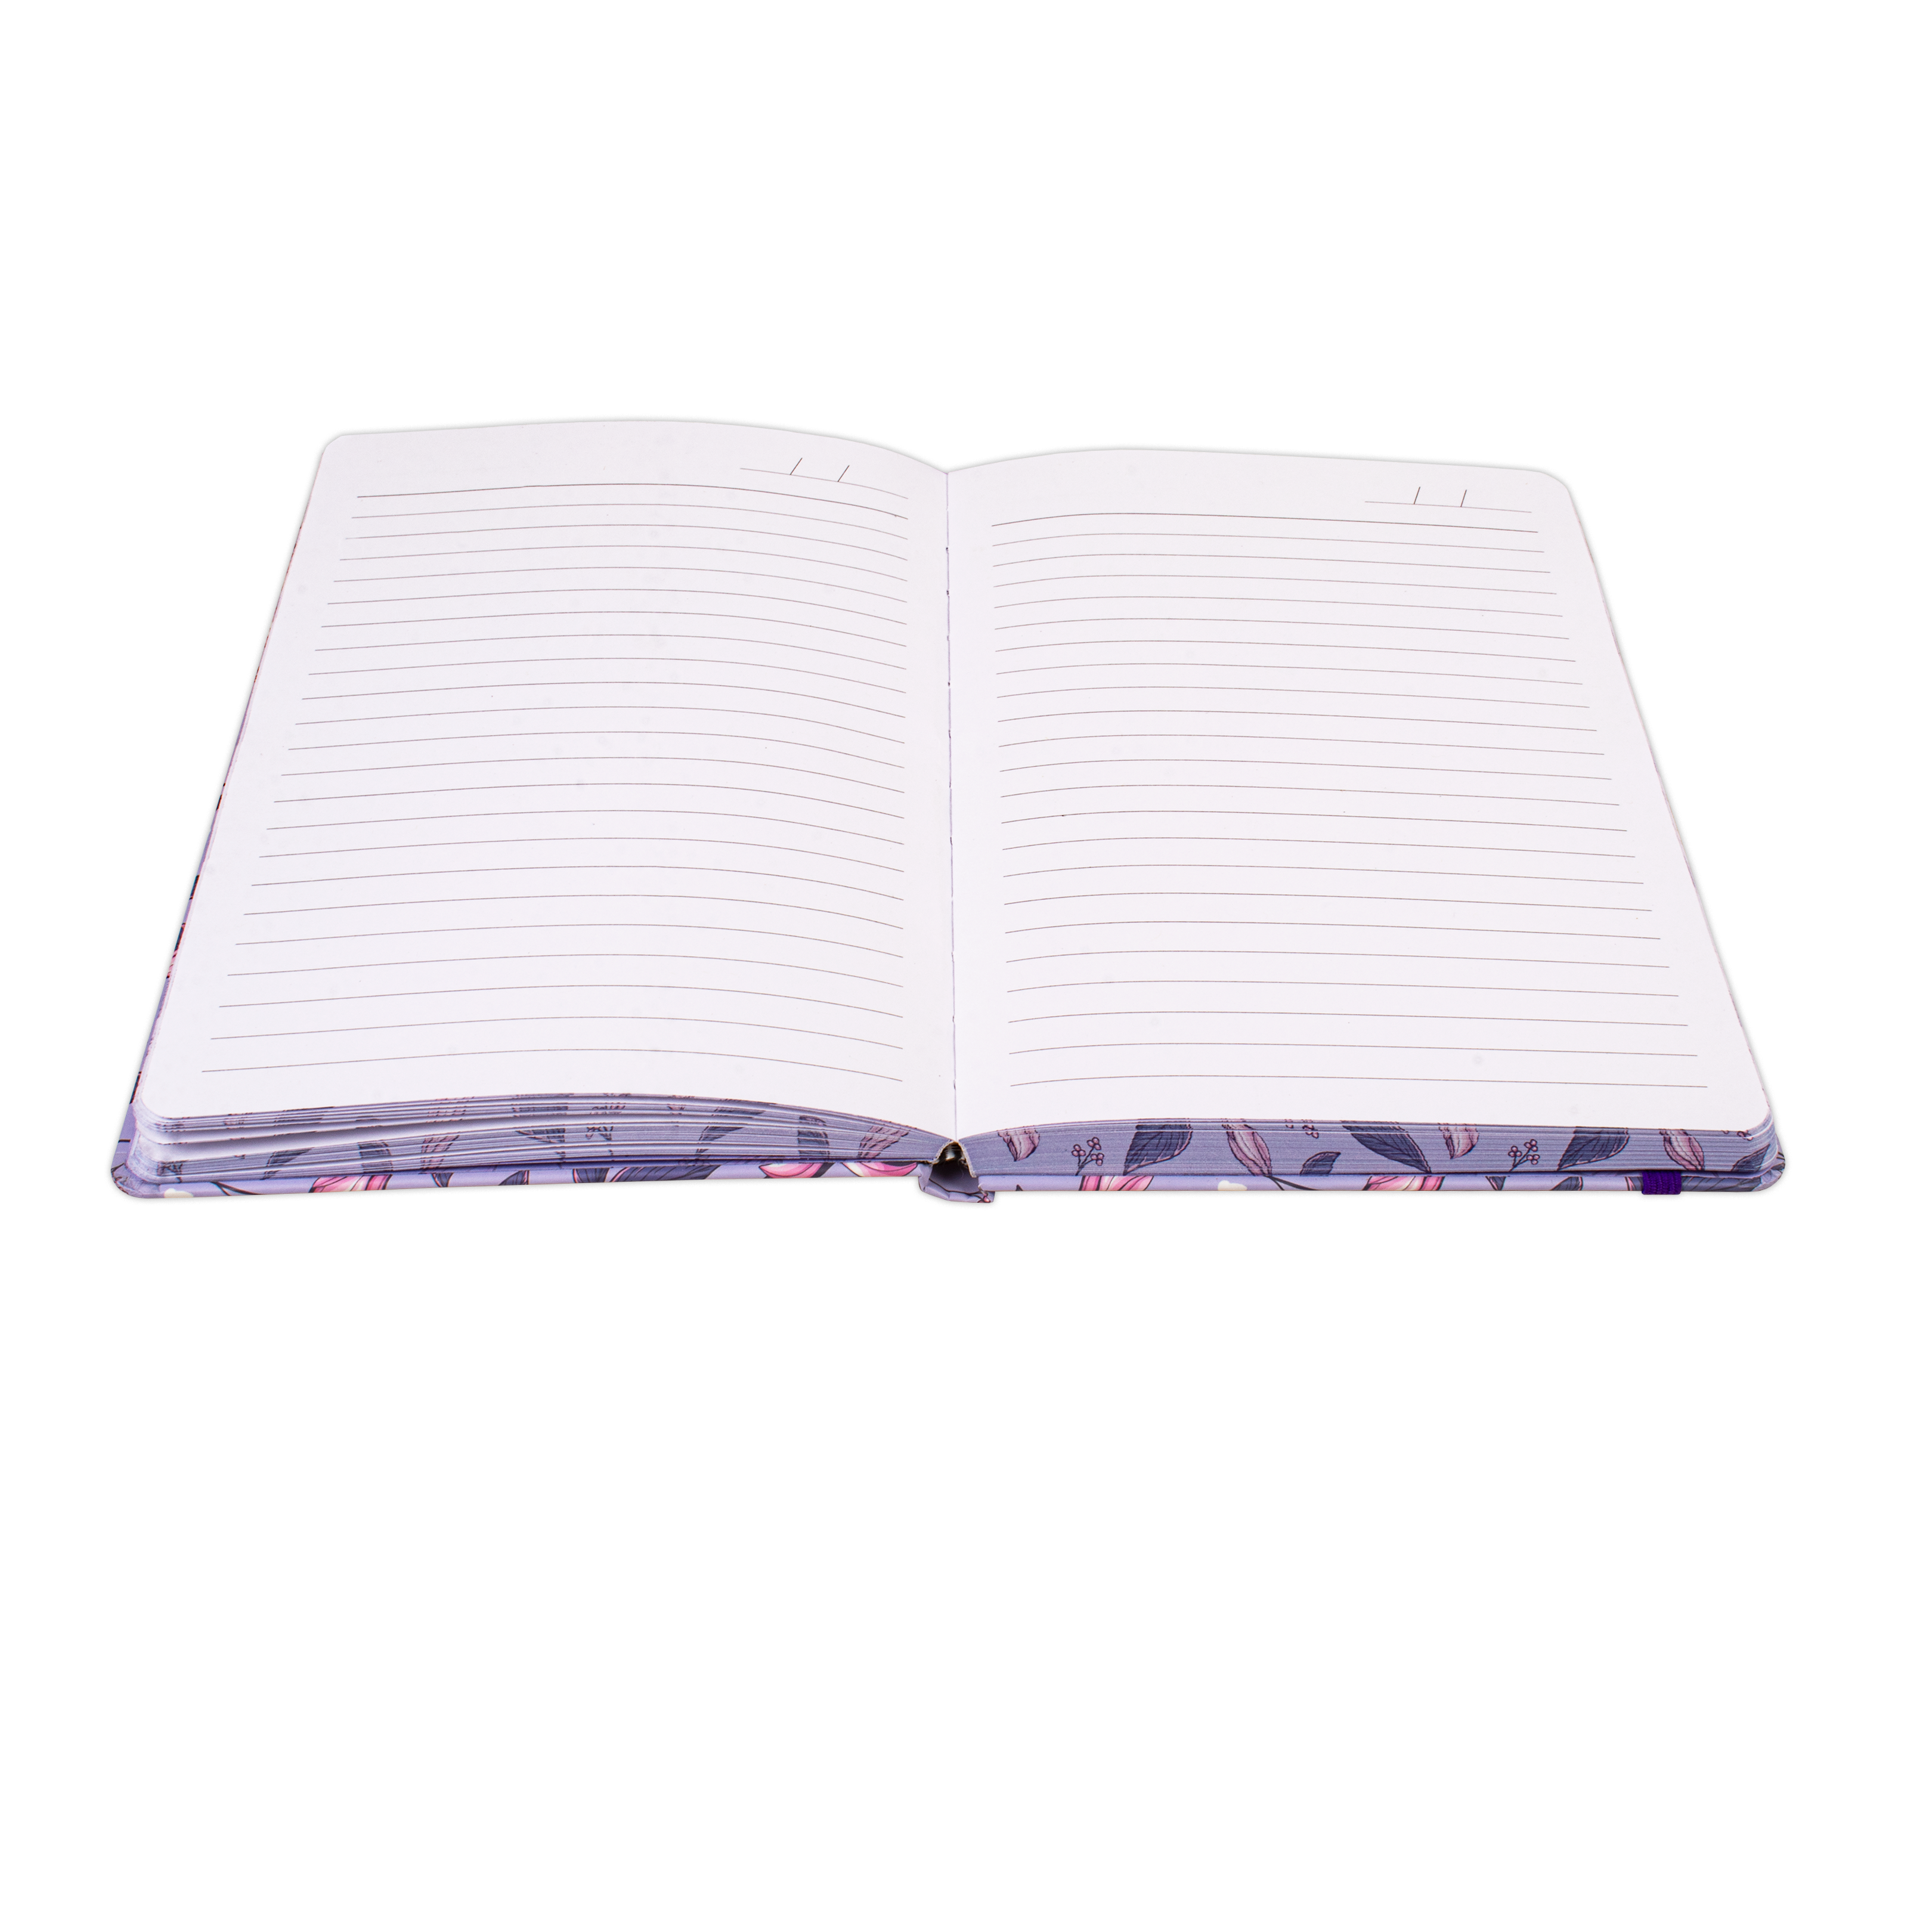 Hardbound Ruled Notebook Follow Your Dreams Edge Printed With Elastic Band 140mm X 210mm 192pages 100gsm